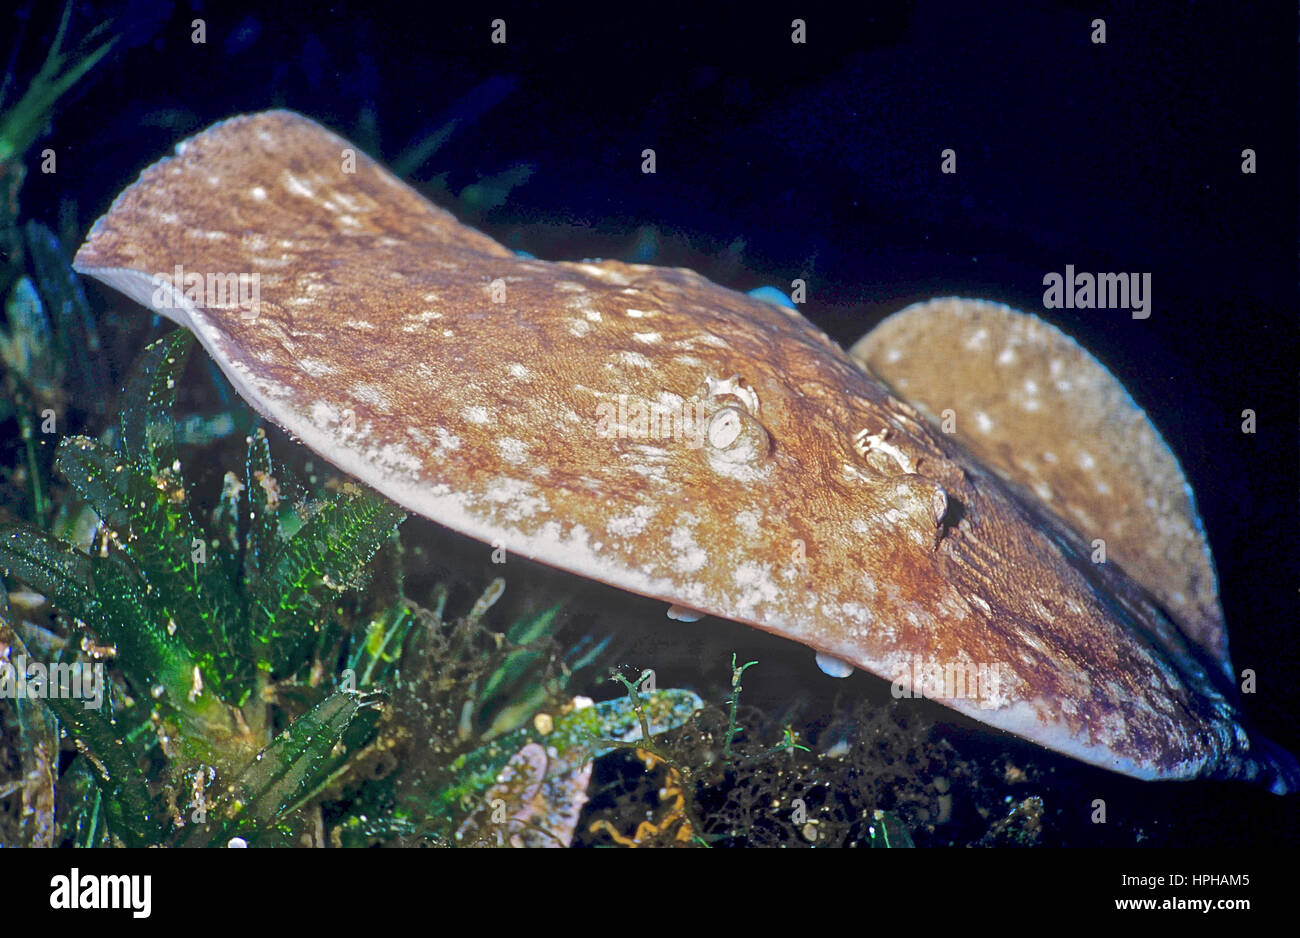 A scalloped torpedo ray (Torpedo panthera): also called an electric ray, as it can deliver a powerful electric shock. Dangerous! Egyptian Red Sea. Stock Photo